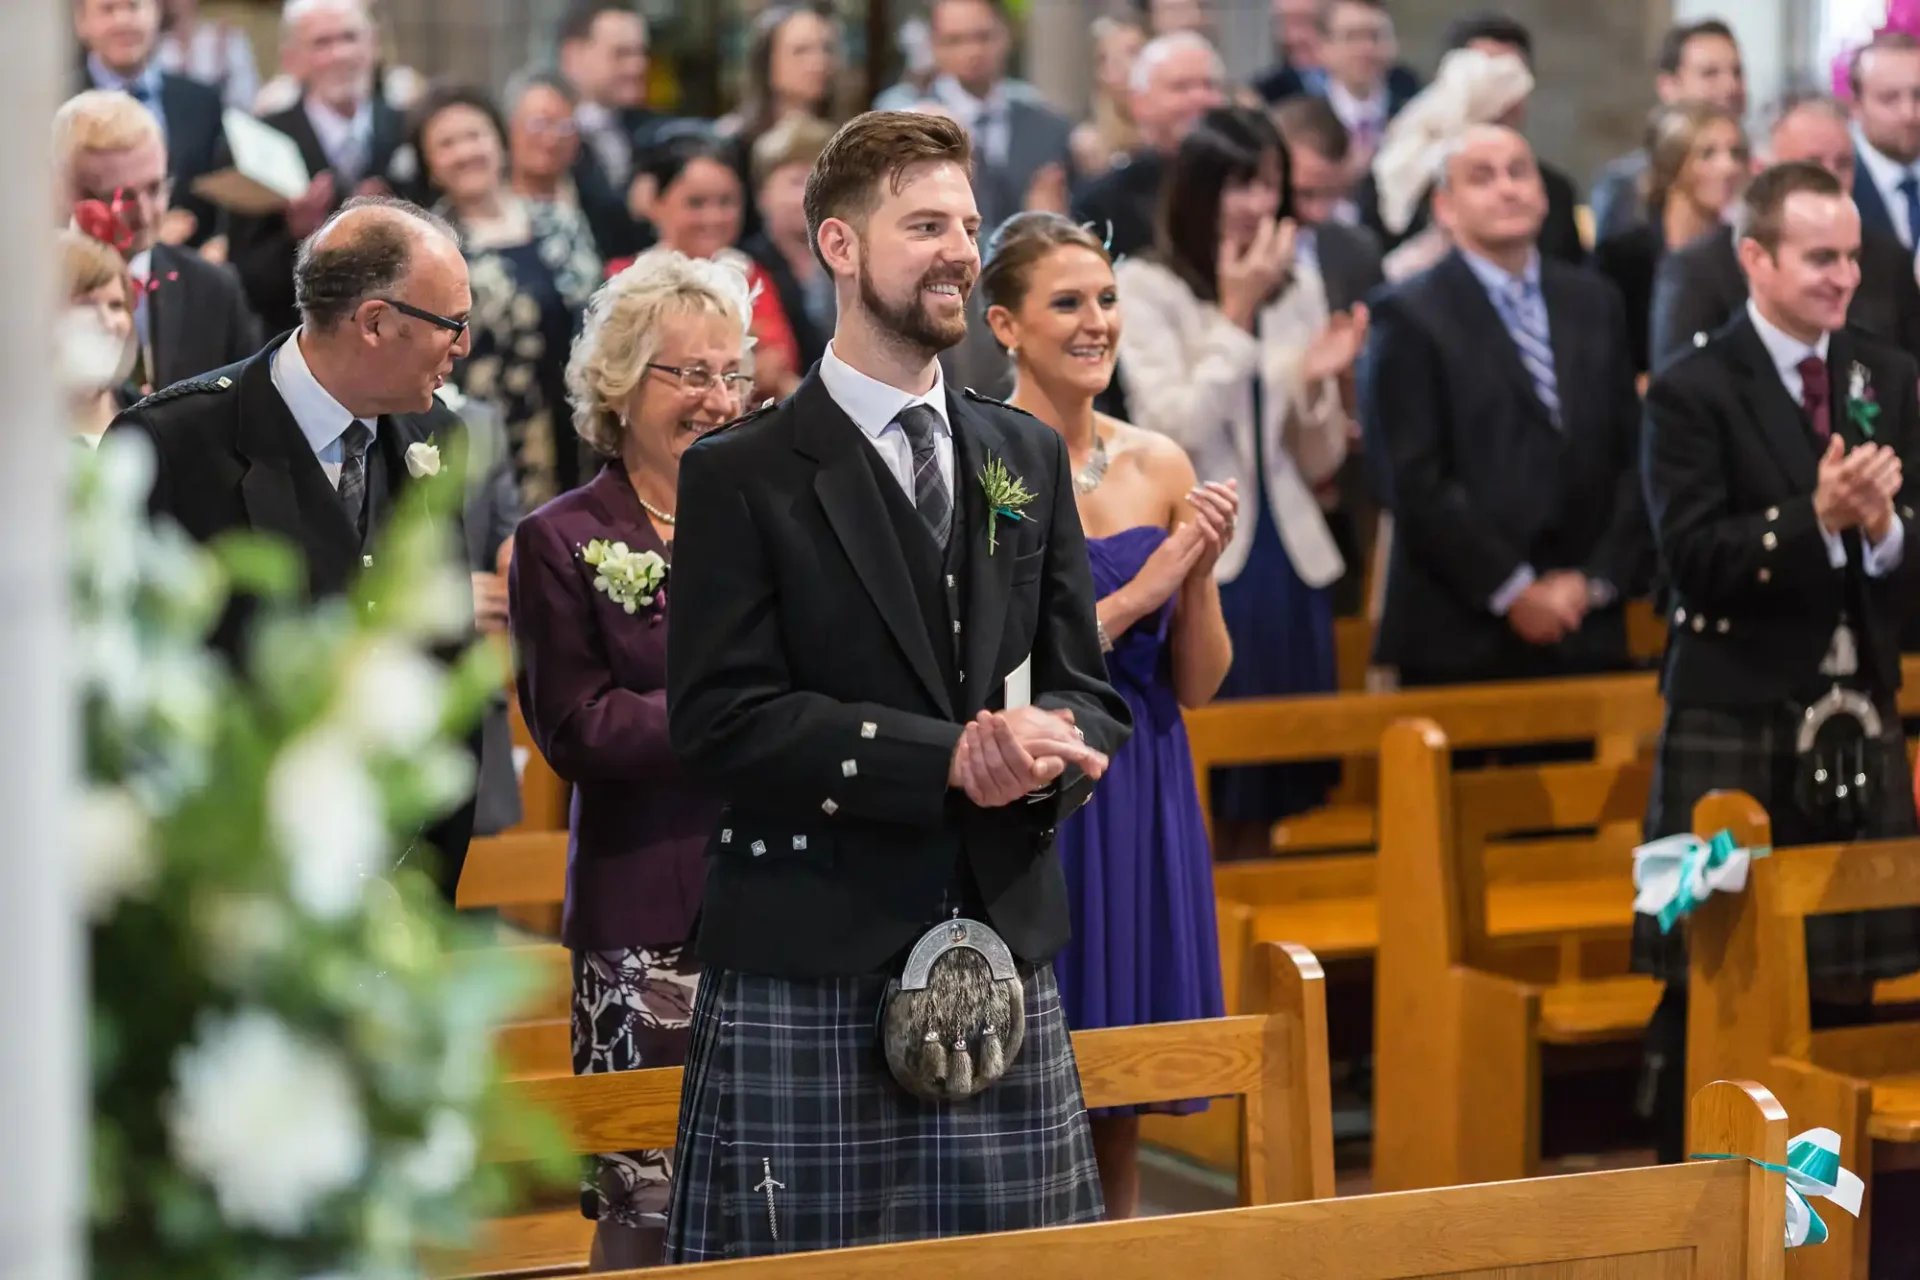 A groom in a kilt smiles during a wedding ceremony inside a church, surrounded by guests in formal attire.